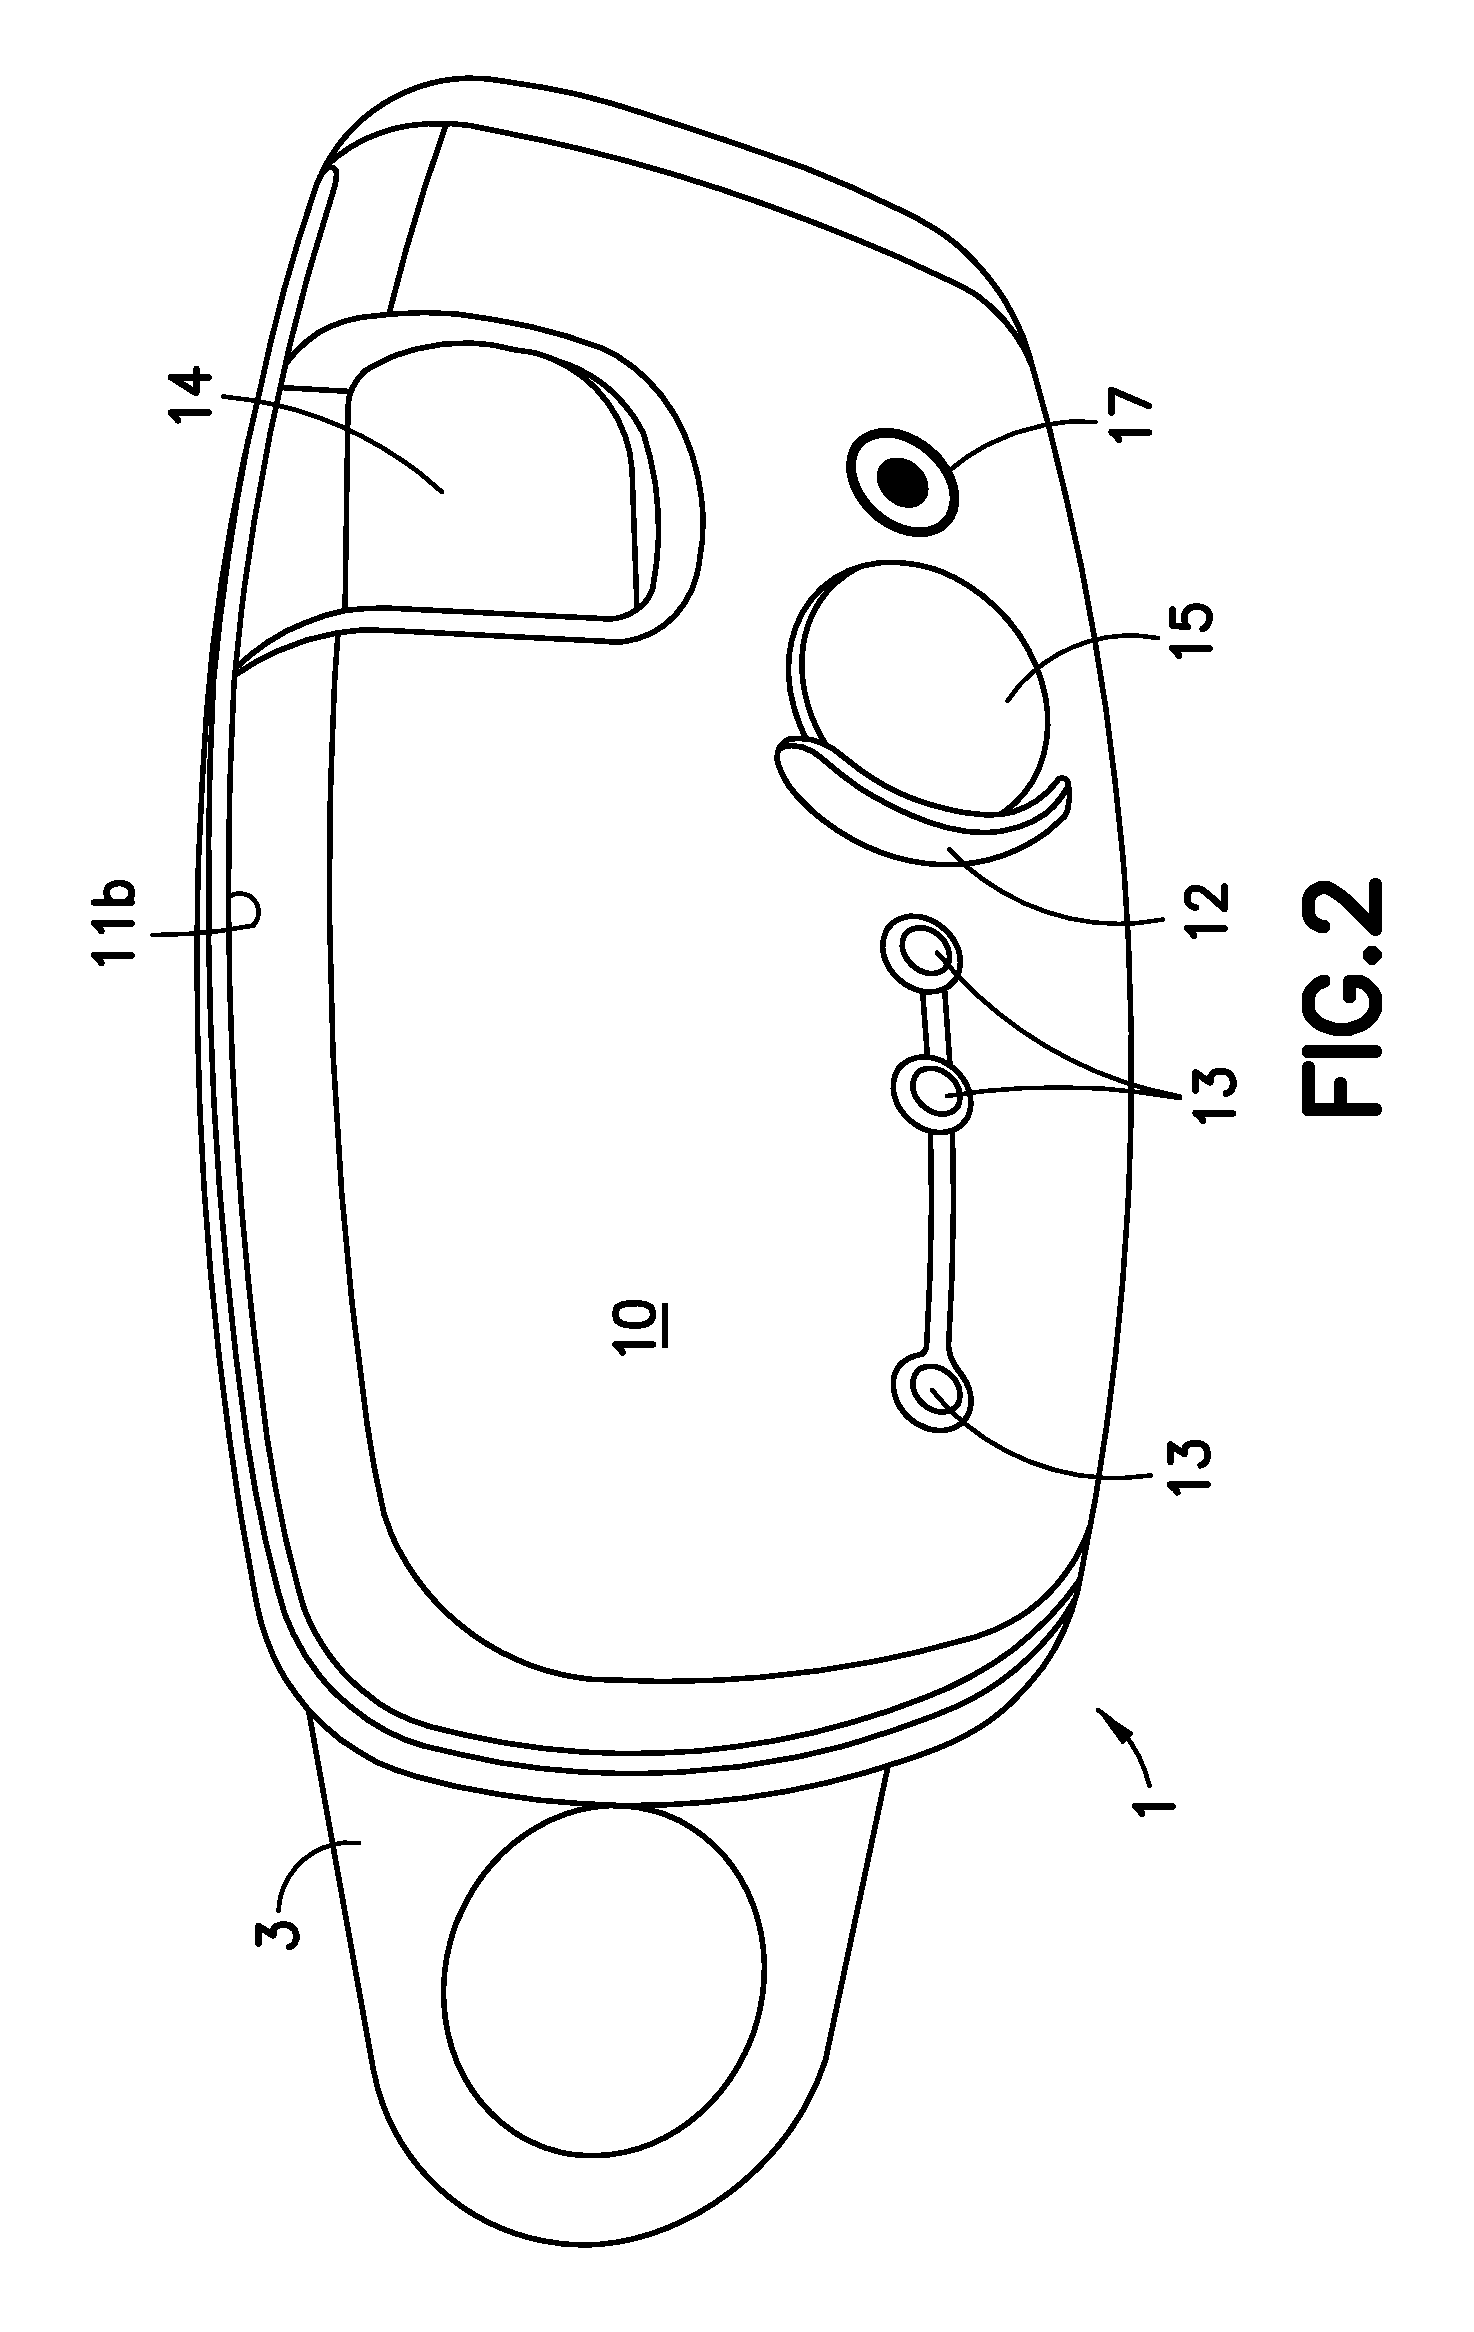 Infusion device with safety feature for preventing inadvertent activation